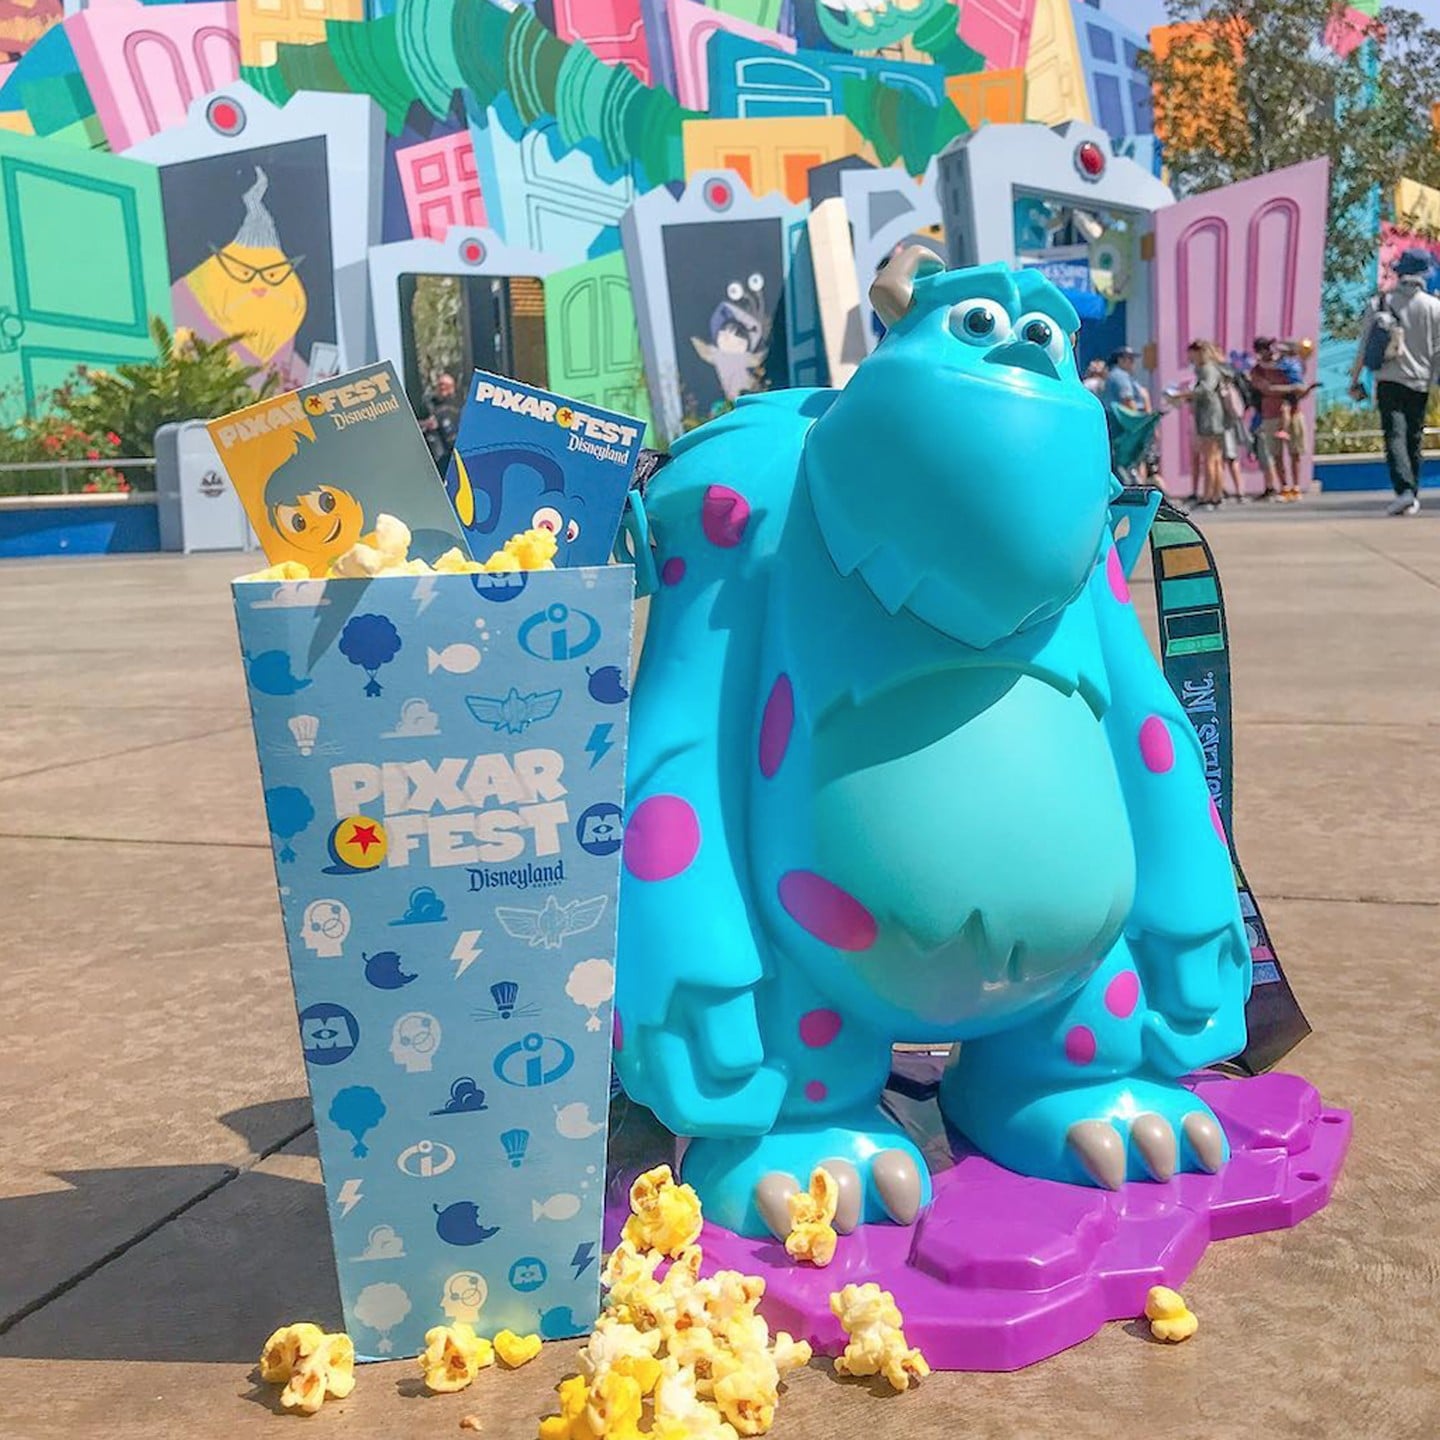 Why Are Disney's Souvenir Popcorn Buckets Becoming The New Must